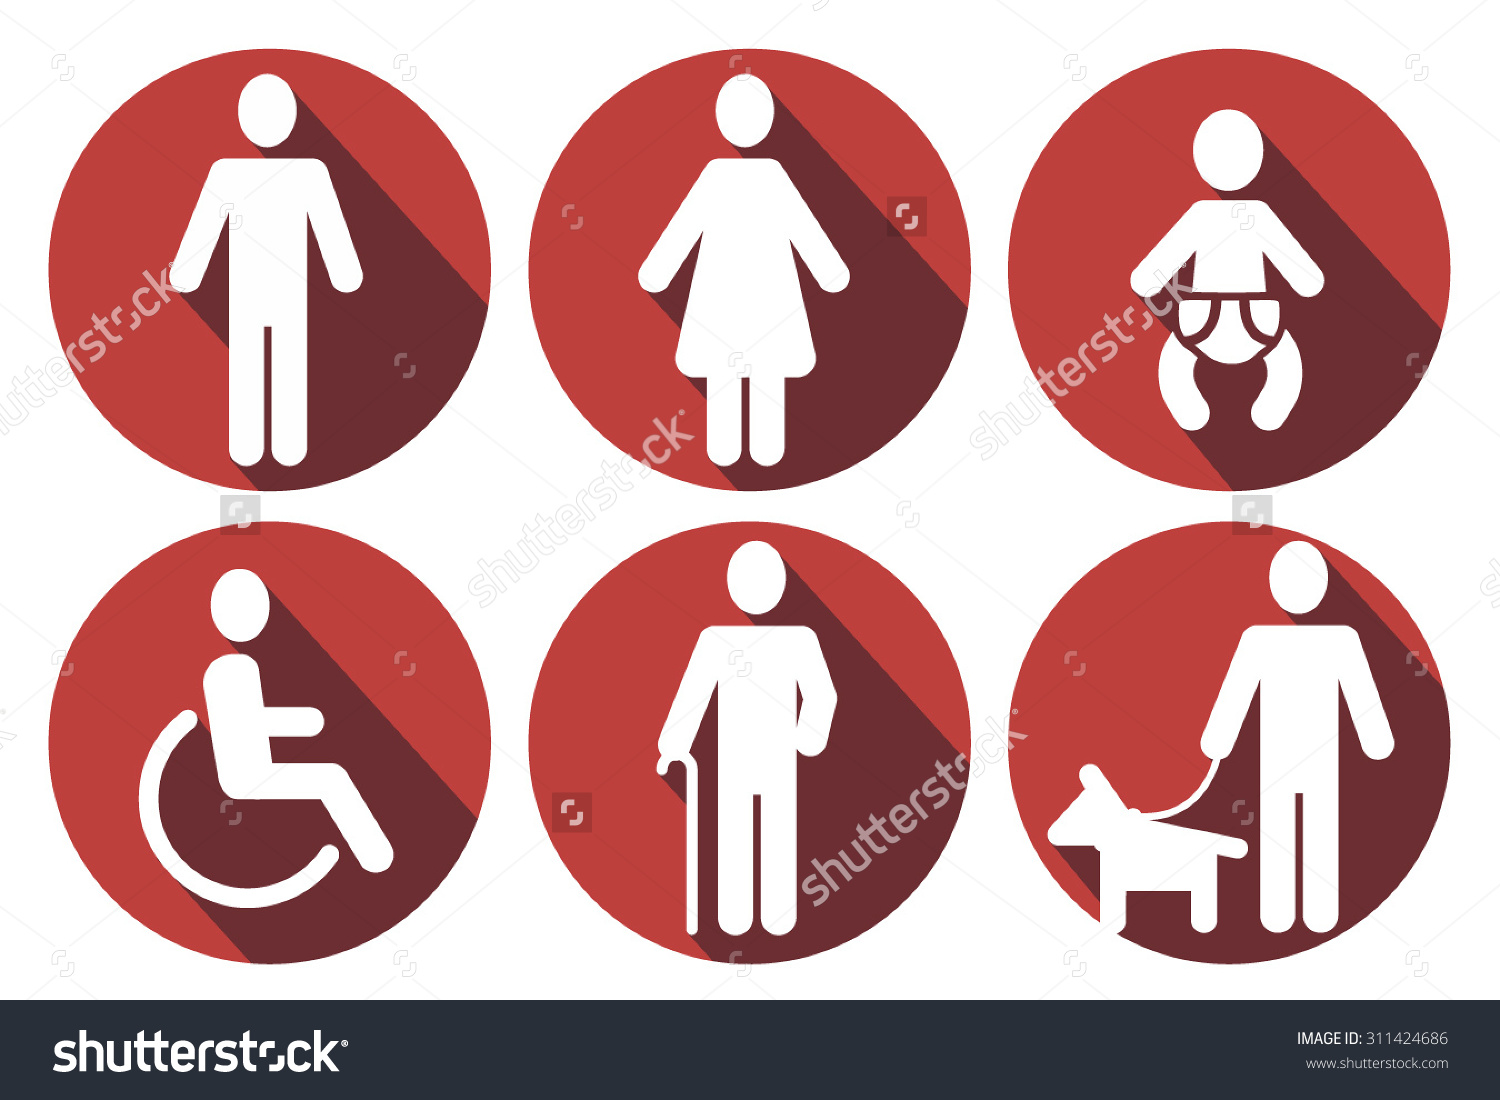 Old Man Women Icon Images